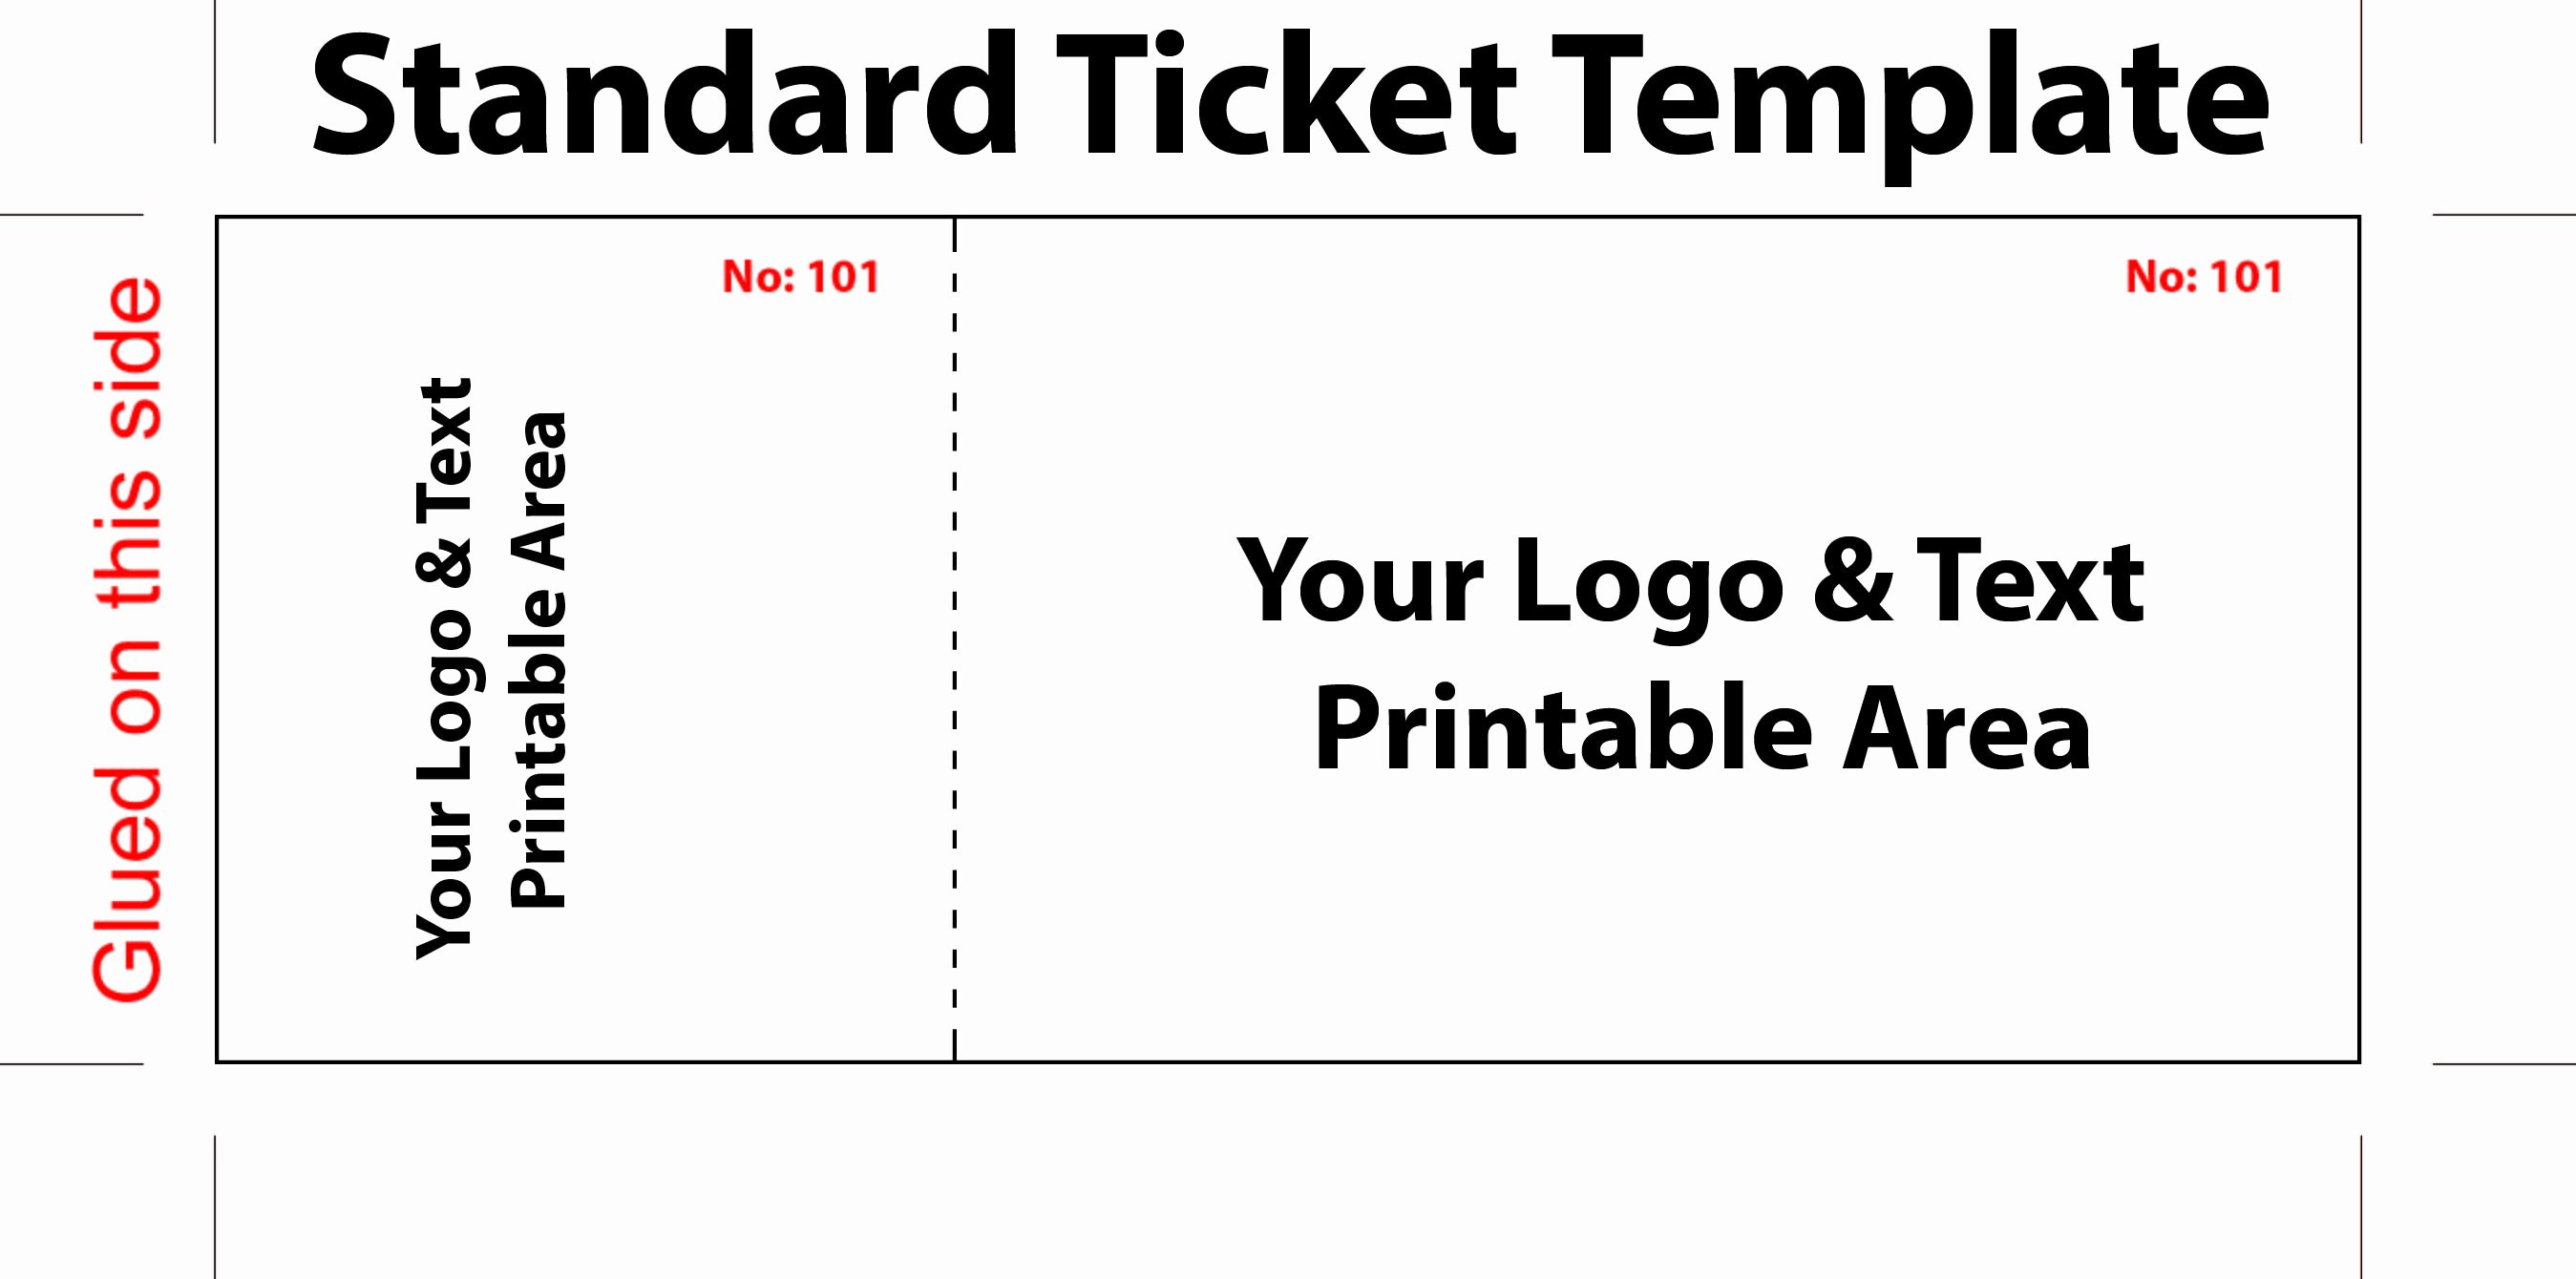 Free Editable Standard Ticket Template Example for Concert